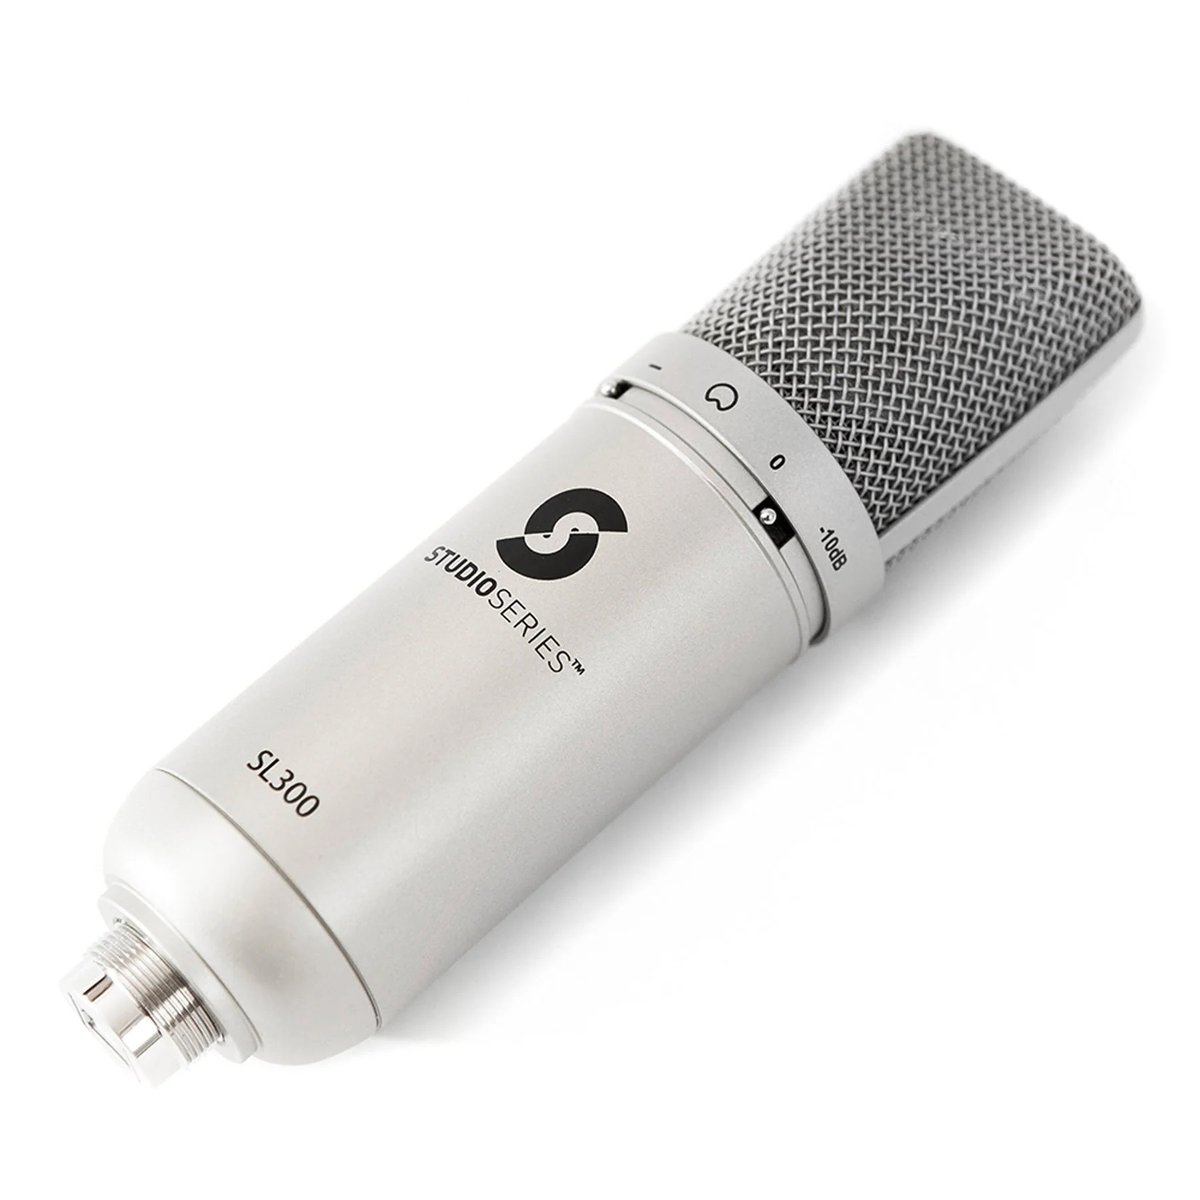 @ChatsunamiPod A bit of an odd one, an EditorsKeys SL300 USB. I have been using it for years and, as far as condenser mics go, it still does a great job. A bit fidgety with drivers but when it's running it sound pretty good